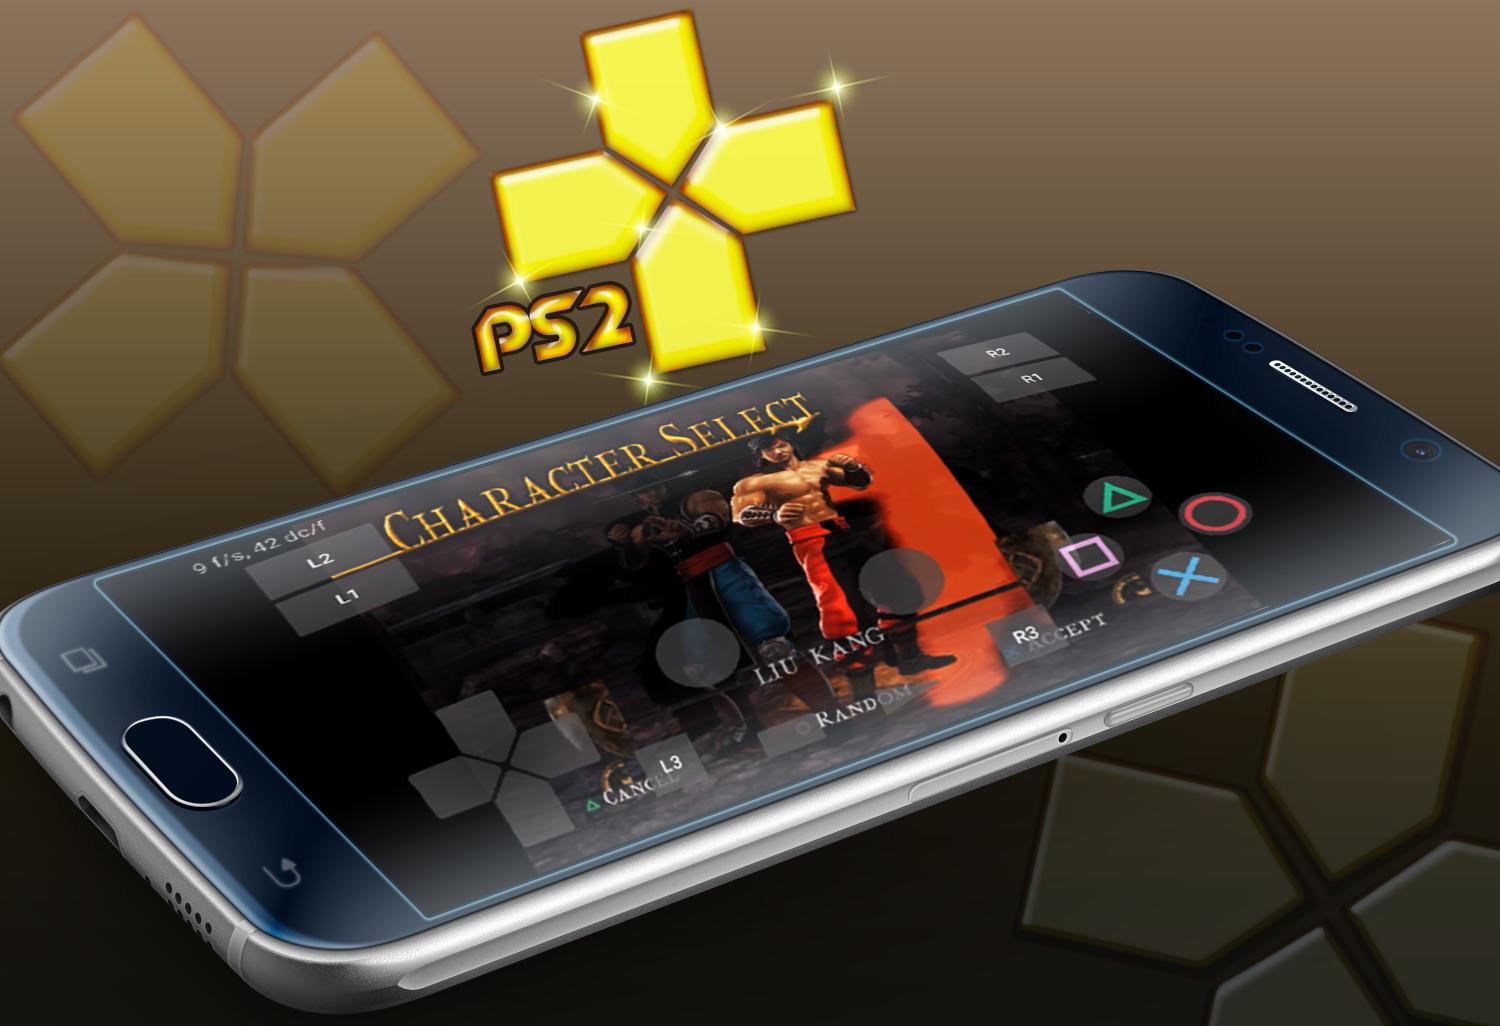 Gold Ps2 Emulator Pro Ppss2 Golden For Android Apk Download